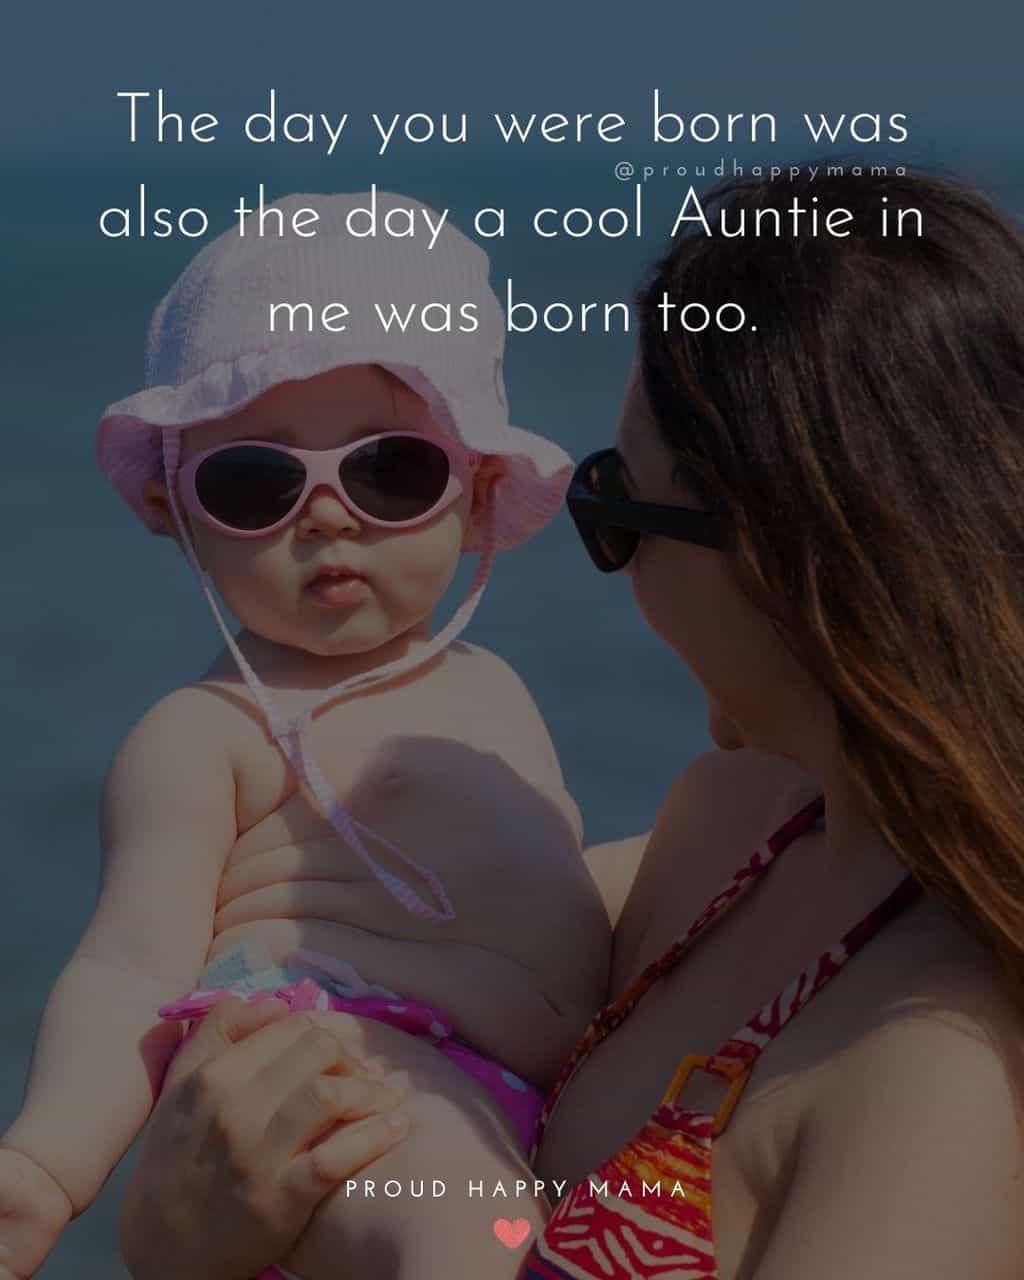 Niece Quotes - The day you were born was also the day a cool Auntie in me was born too.